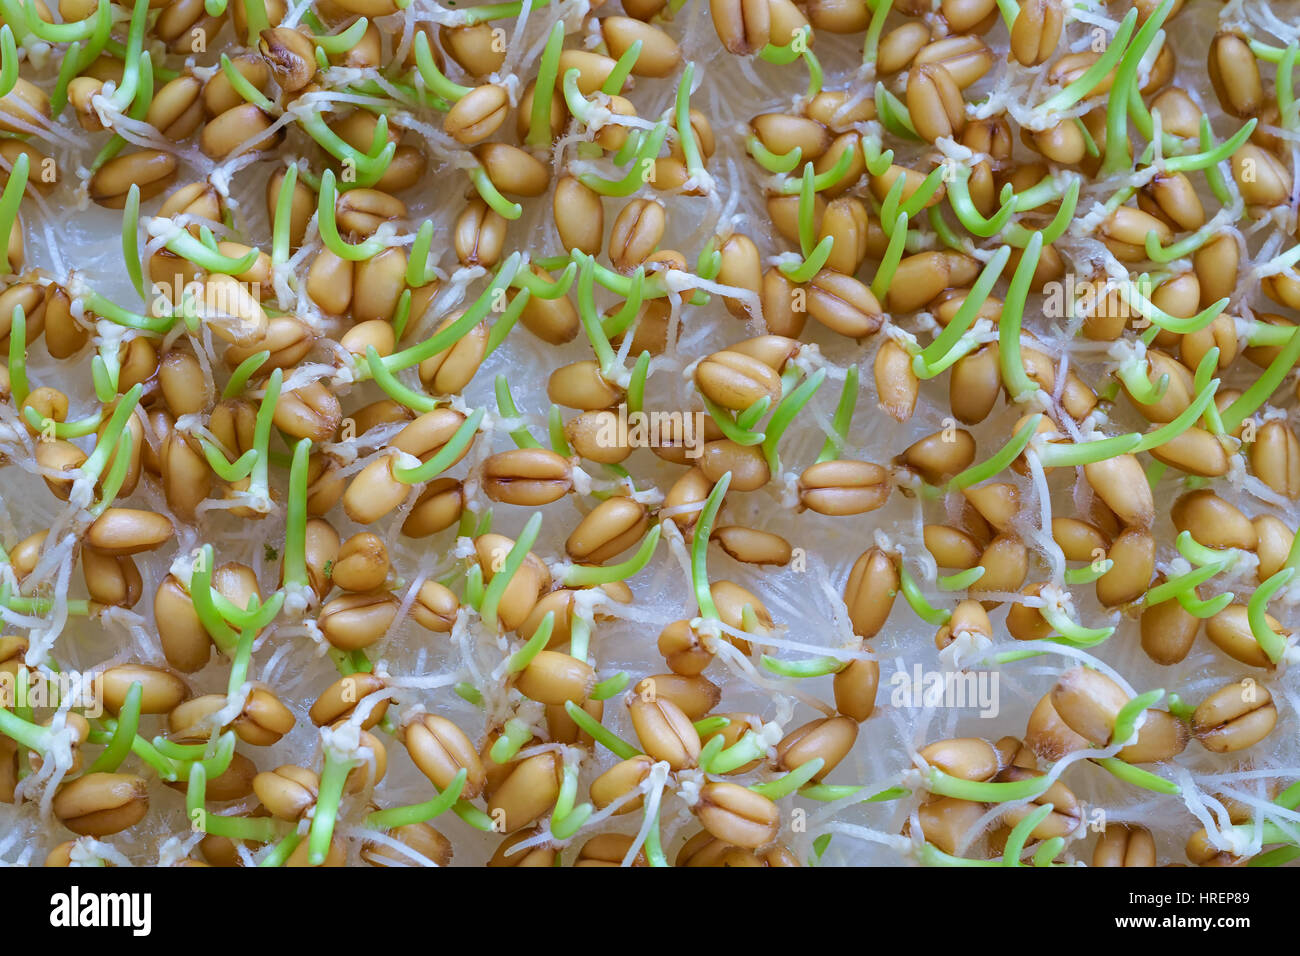 Sprouting wheat seed close up. Stock Photo